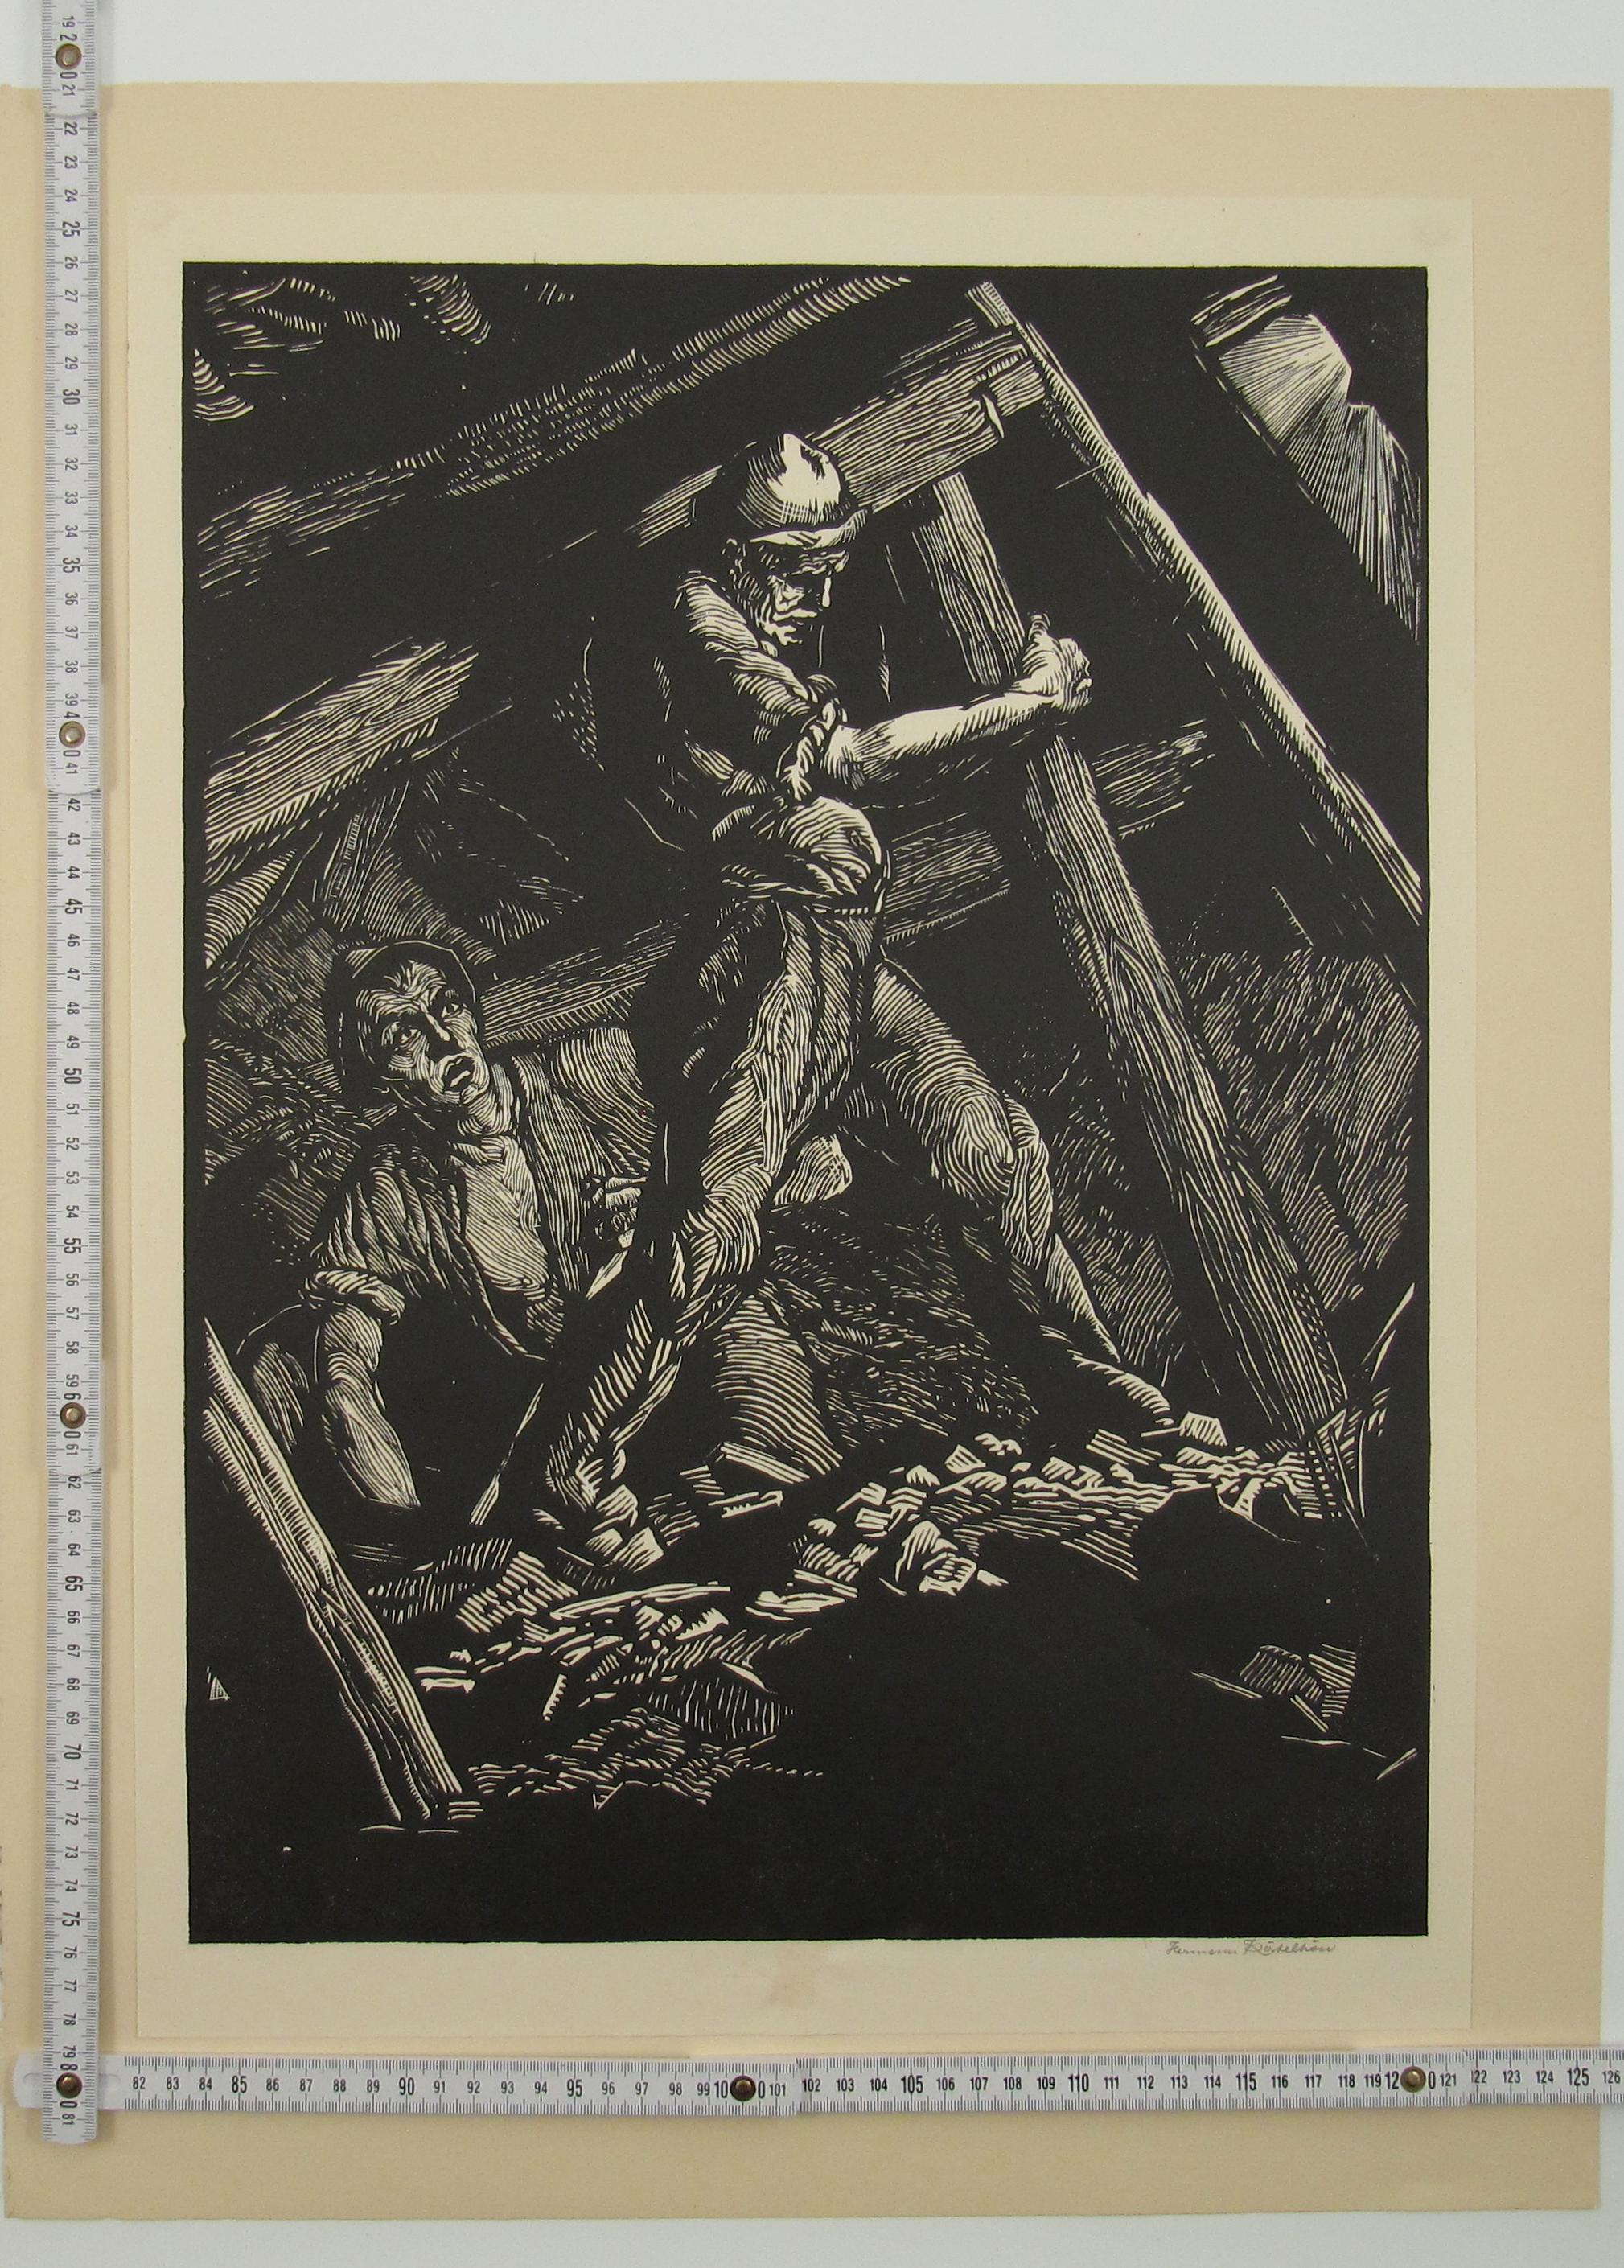 Hermann Kätelhön
(German, * 22. September 1884, Hofgeismar; † 24. November 1940, München)


Coal Miners

•	Woodcut, sheet measures ca. 55 x 40 cm
•	The sheet is mounted (fixed at the the two upper corners) behind a tired paper mount
•	Signed in